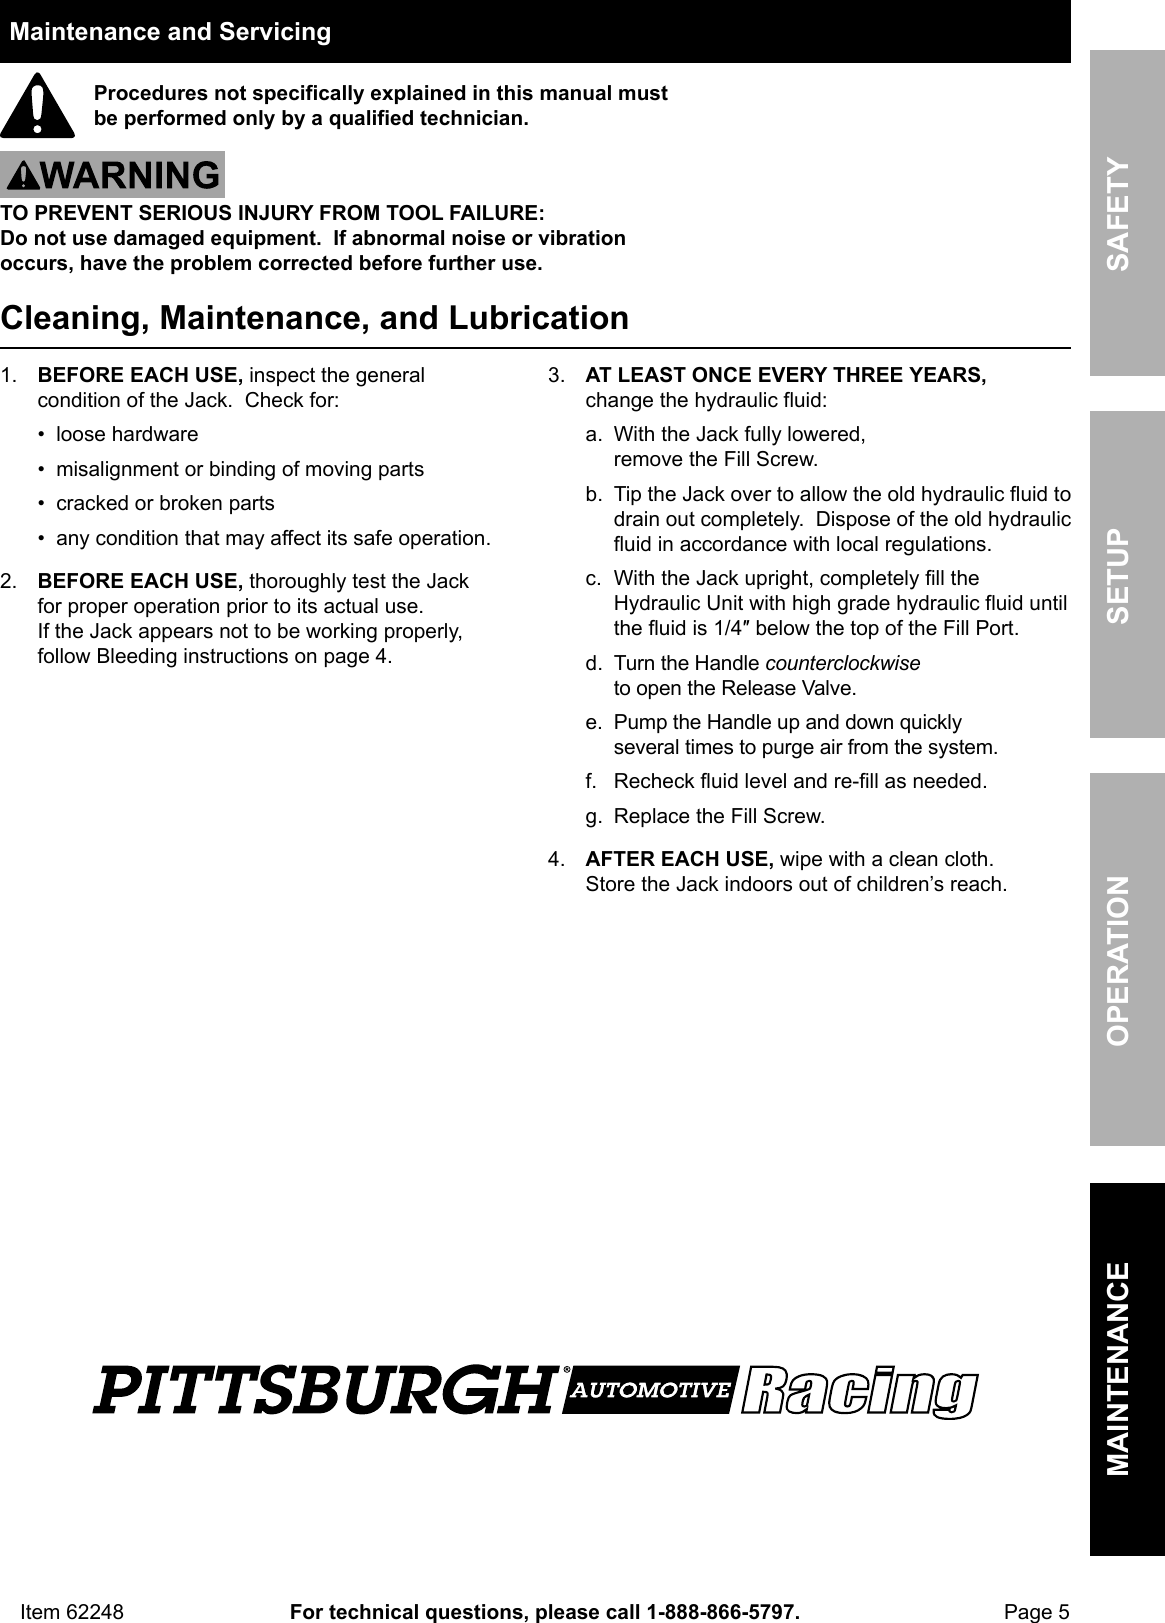 Page 5 of 8 - Manual For The 62248 3 Ton Aluminum Racing Floor Jack With Rapid Pump®